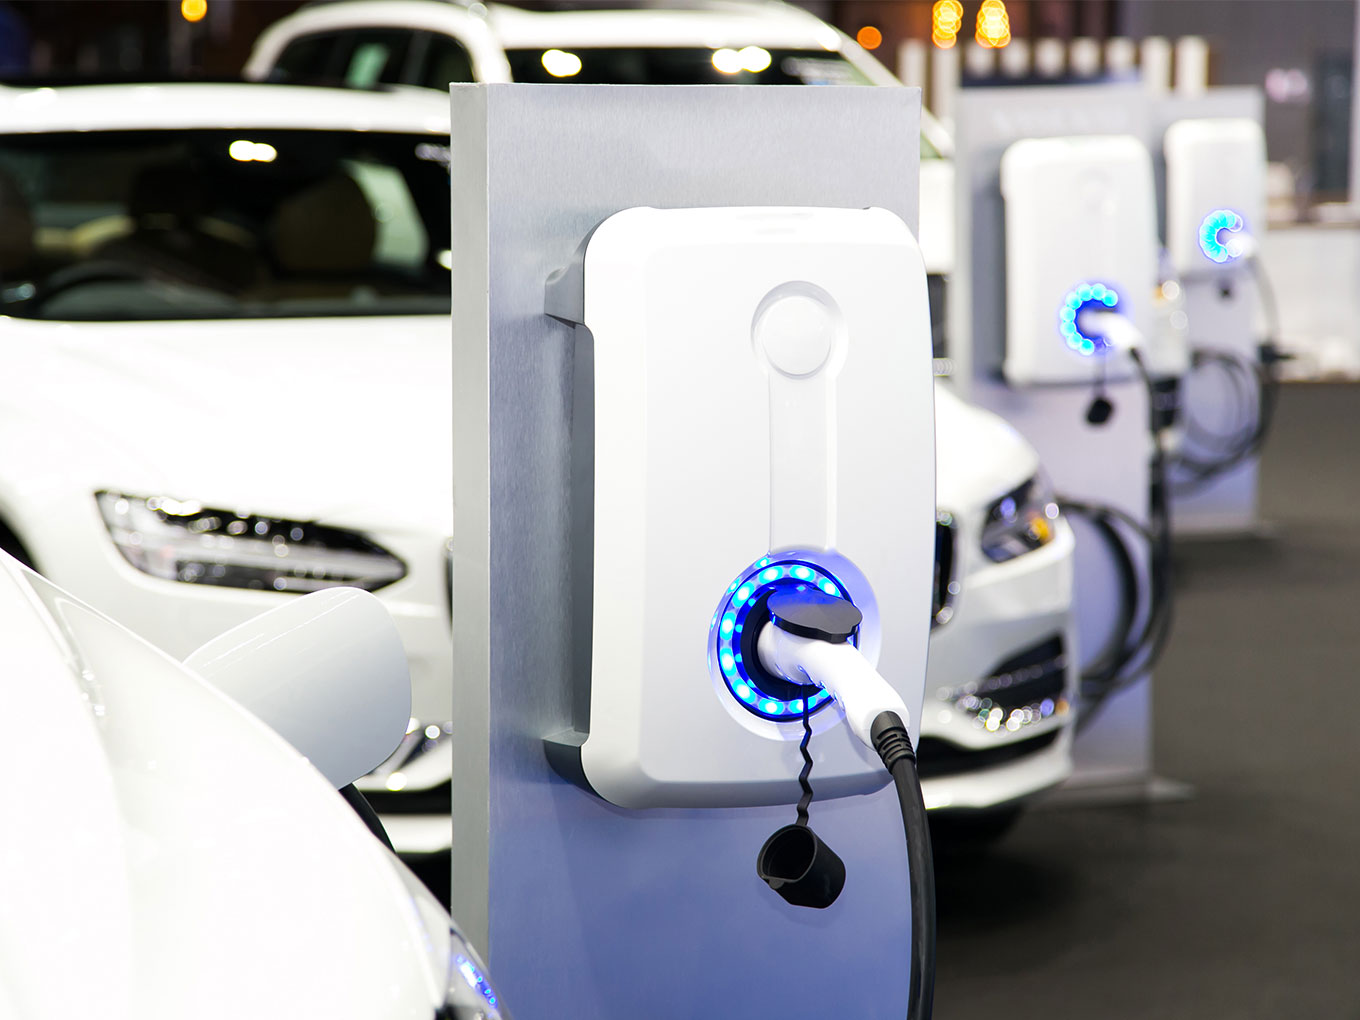 Govt Will Provide Subsidies For All Electric Vehicles Under FAME II